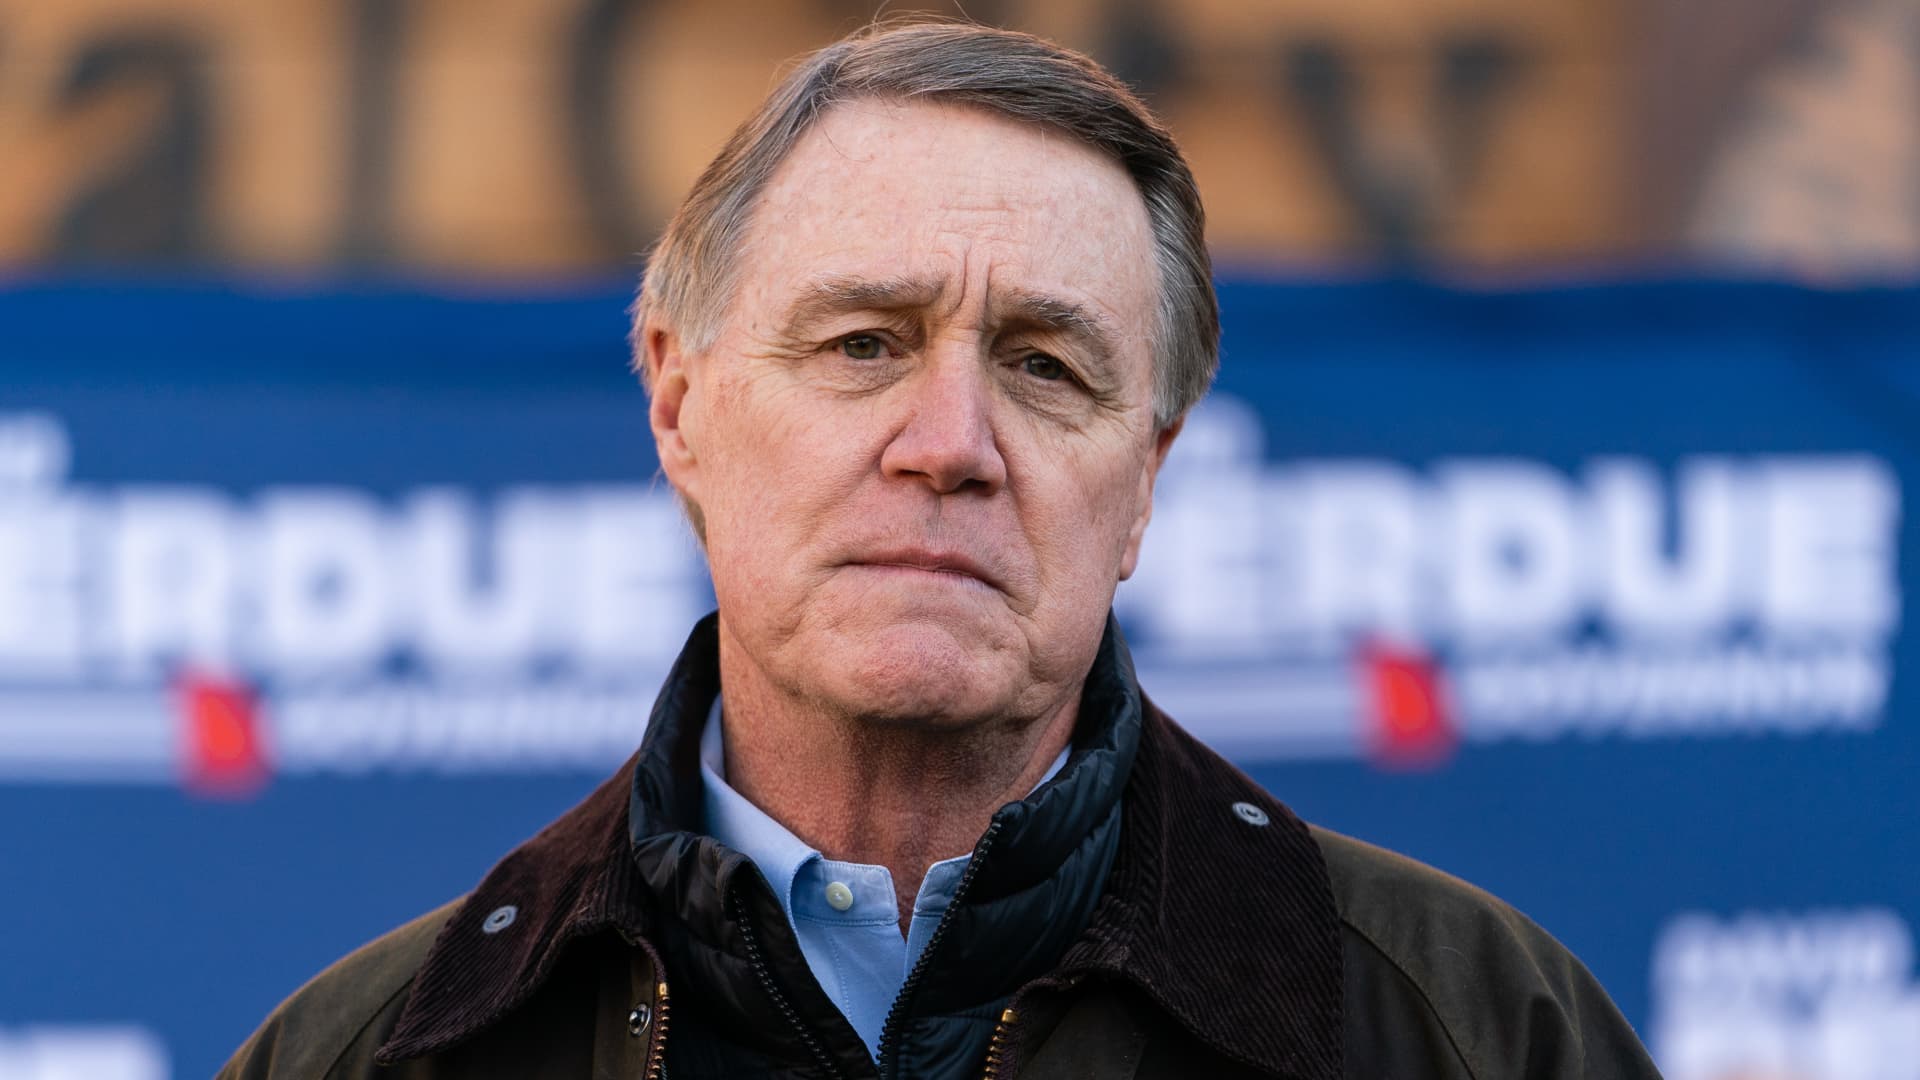 David Perdue, Republican gubernatorial candidate for Georgia, during a news conference ahead of campaign tour in Alpharetta, Georgia, U.S., on Tuesday, Feb. 1, 2022.